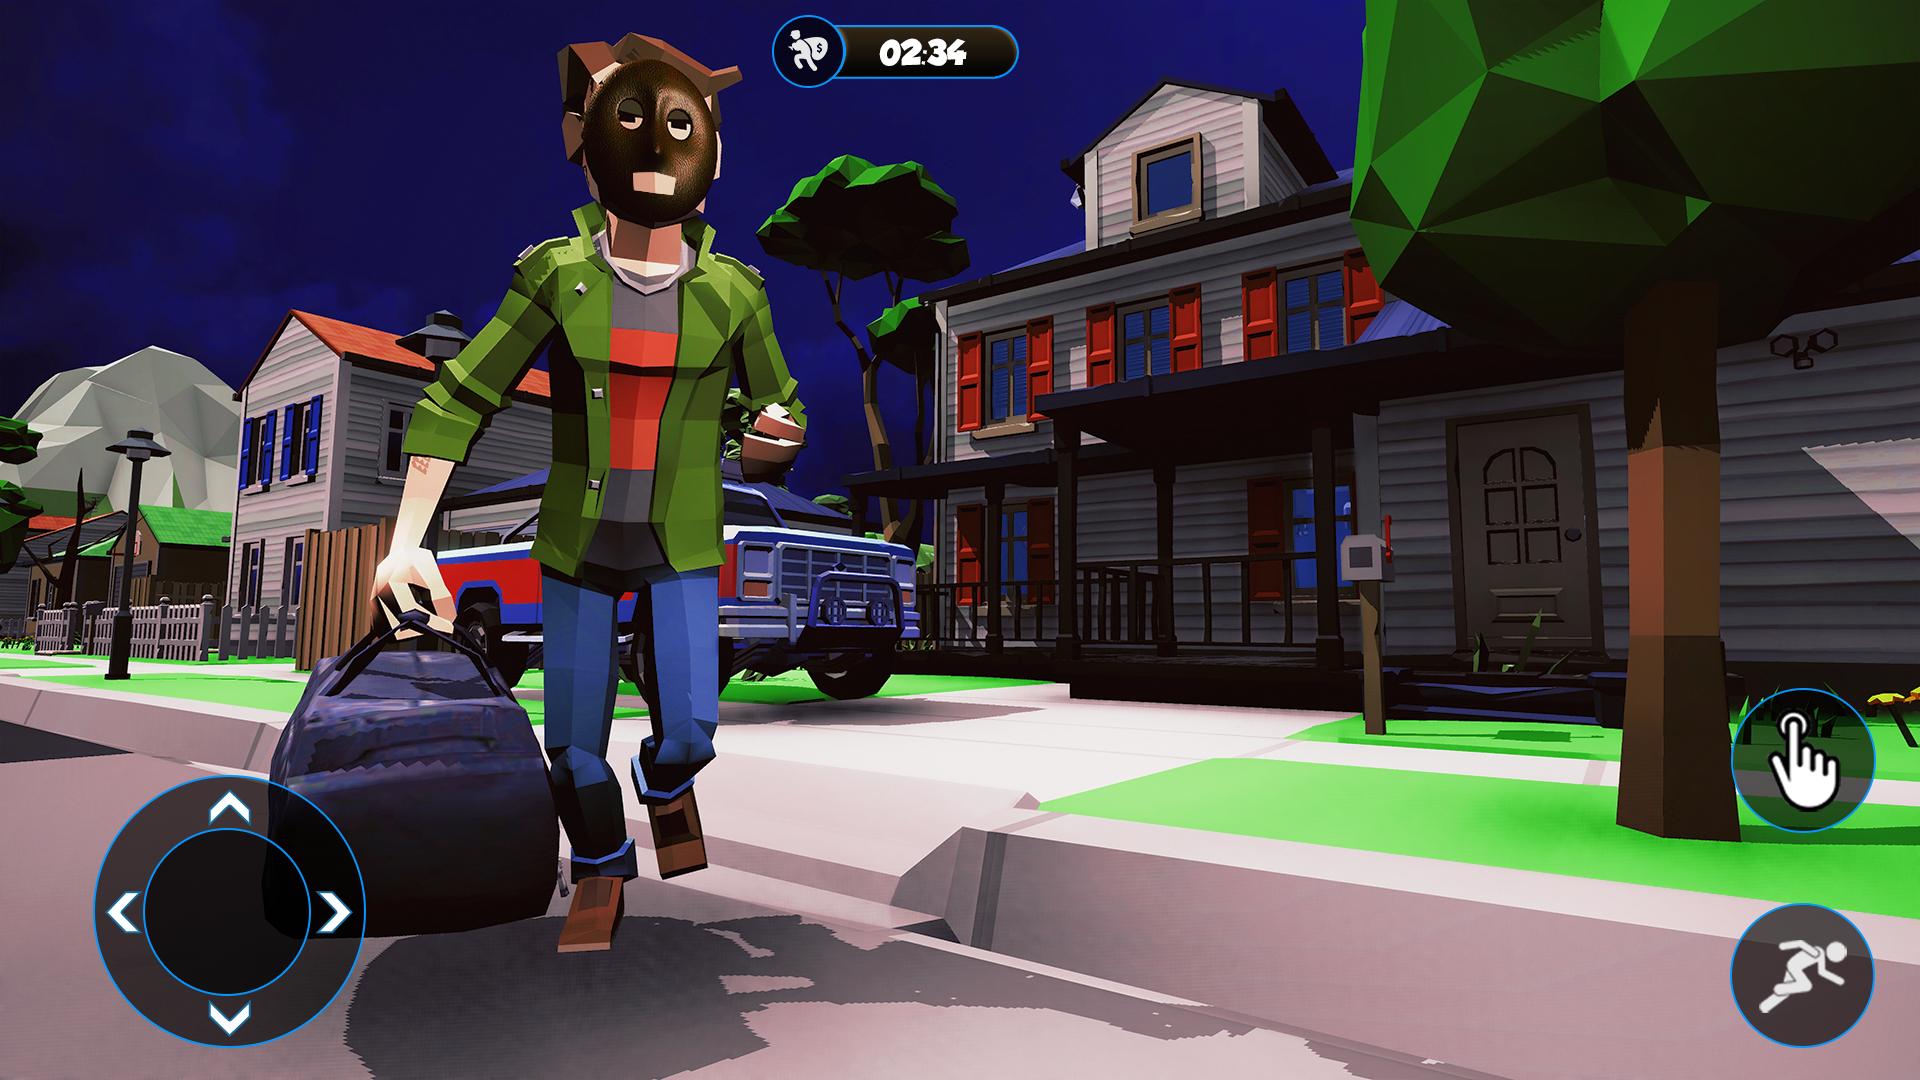 Sneak Thief virtual simulator 2019 for Android - APK Download